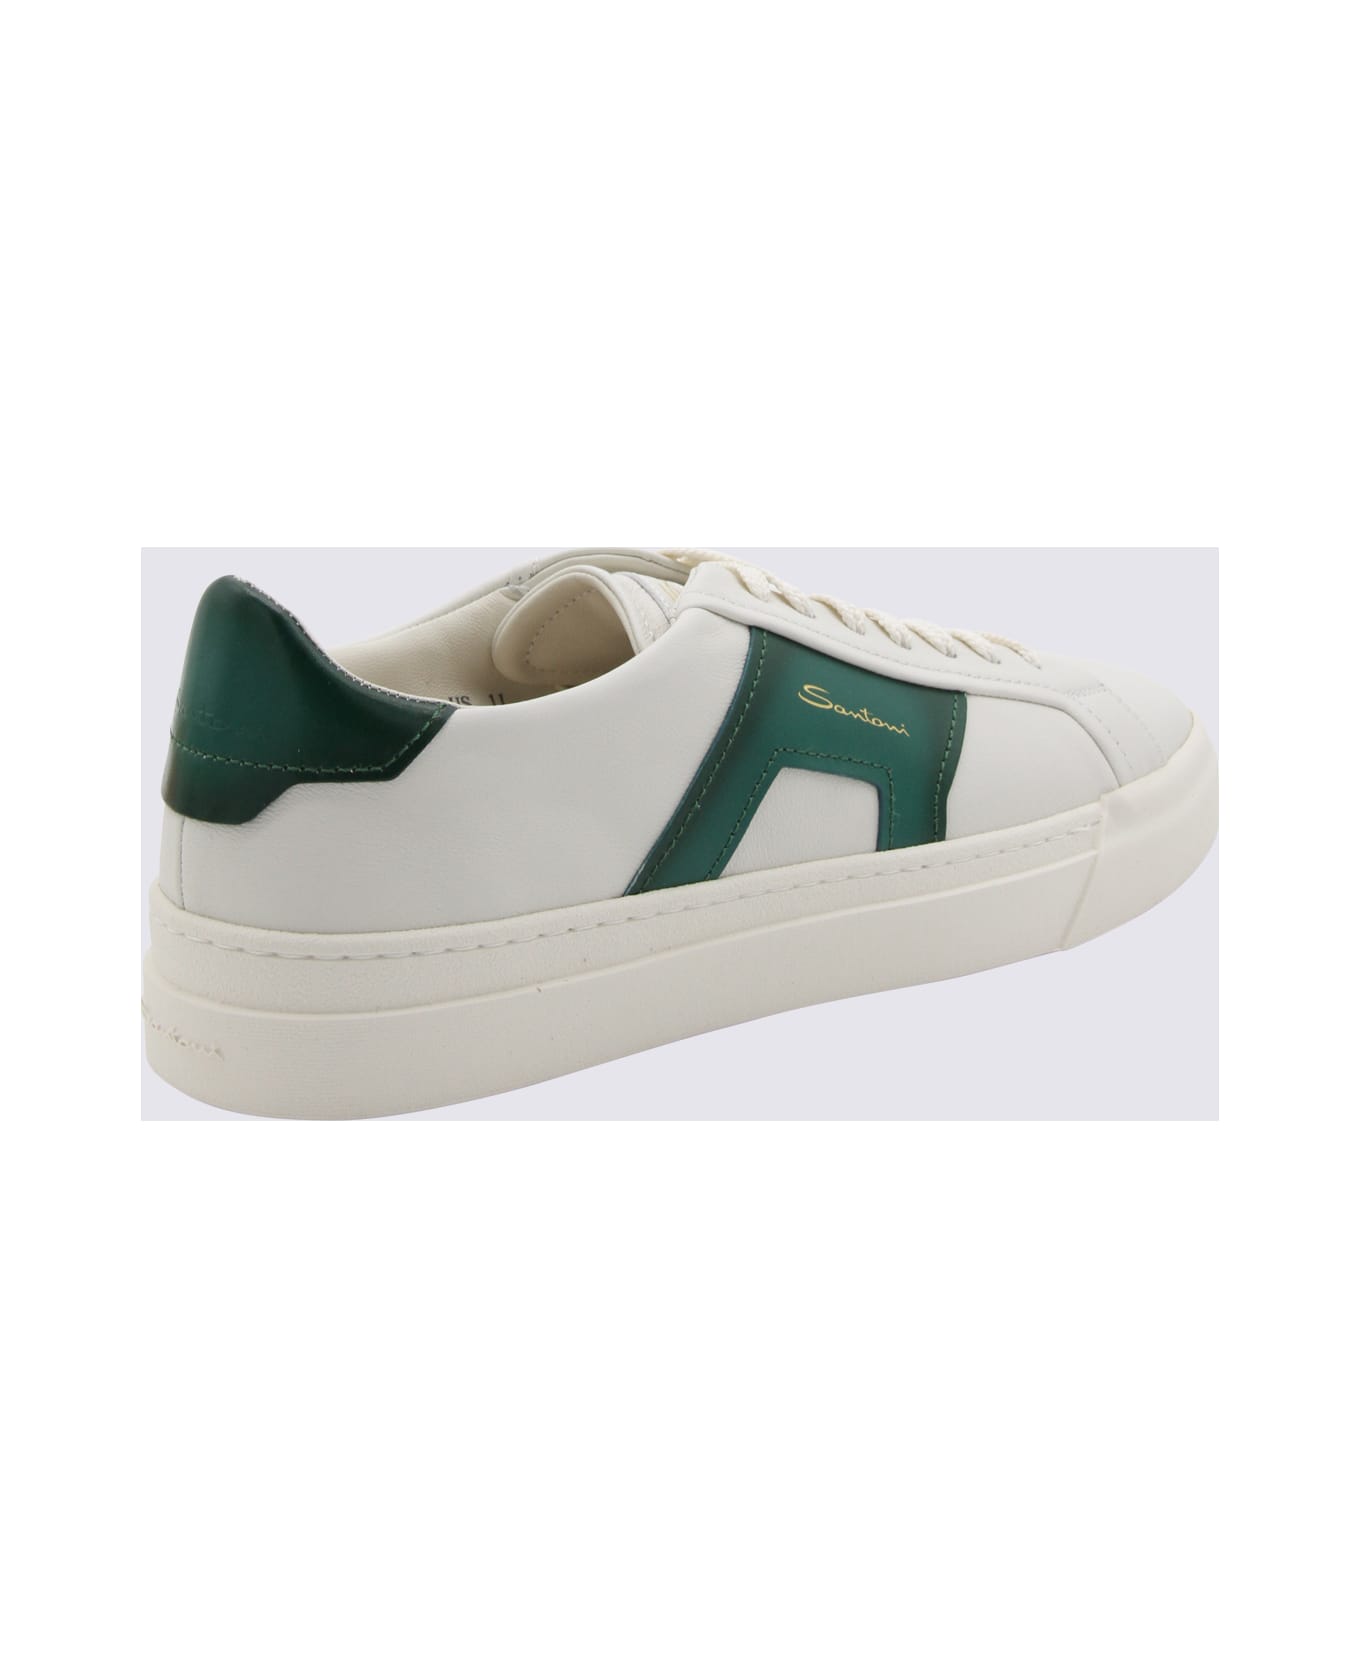 Santoni White And Green Leather Sneakers - White スニーカー